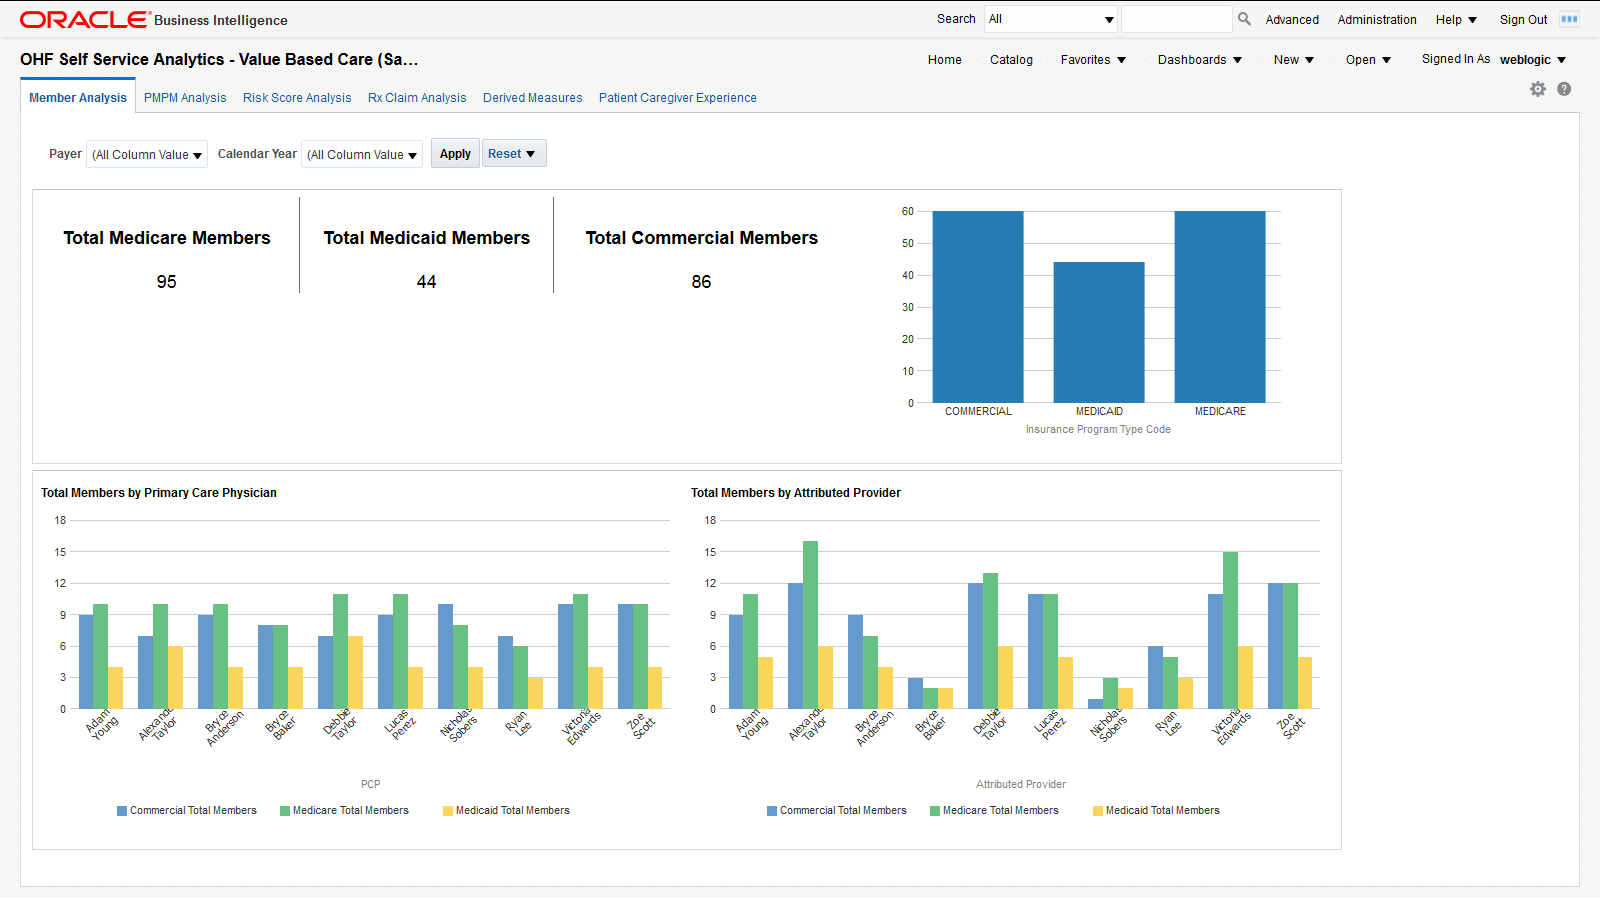 Oracle Health Insurance Analytics in action